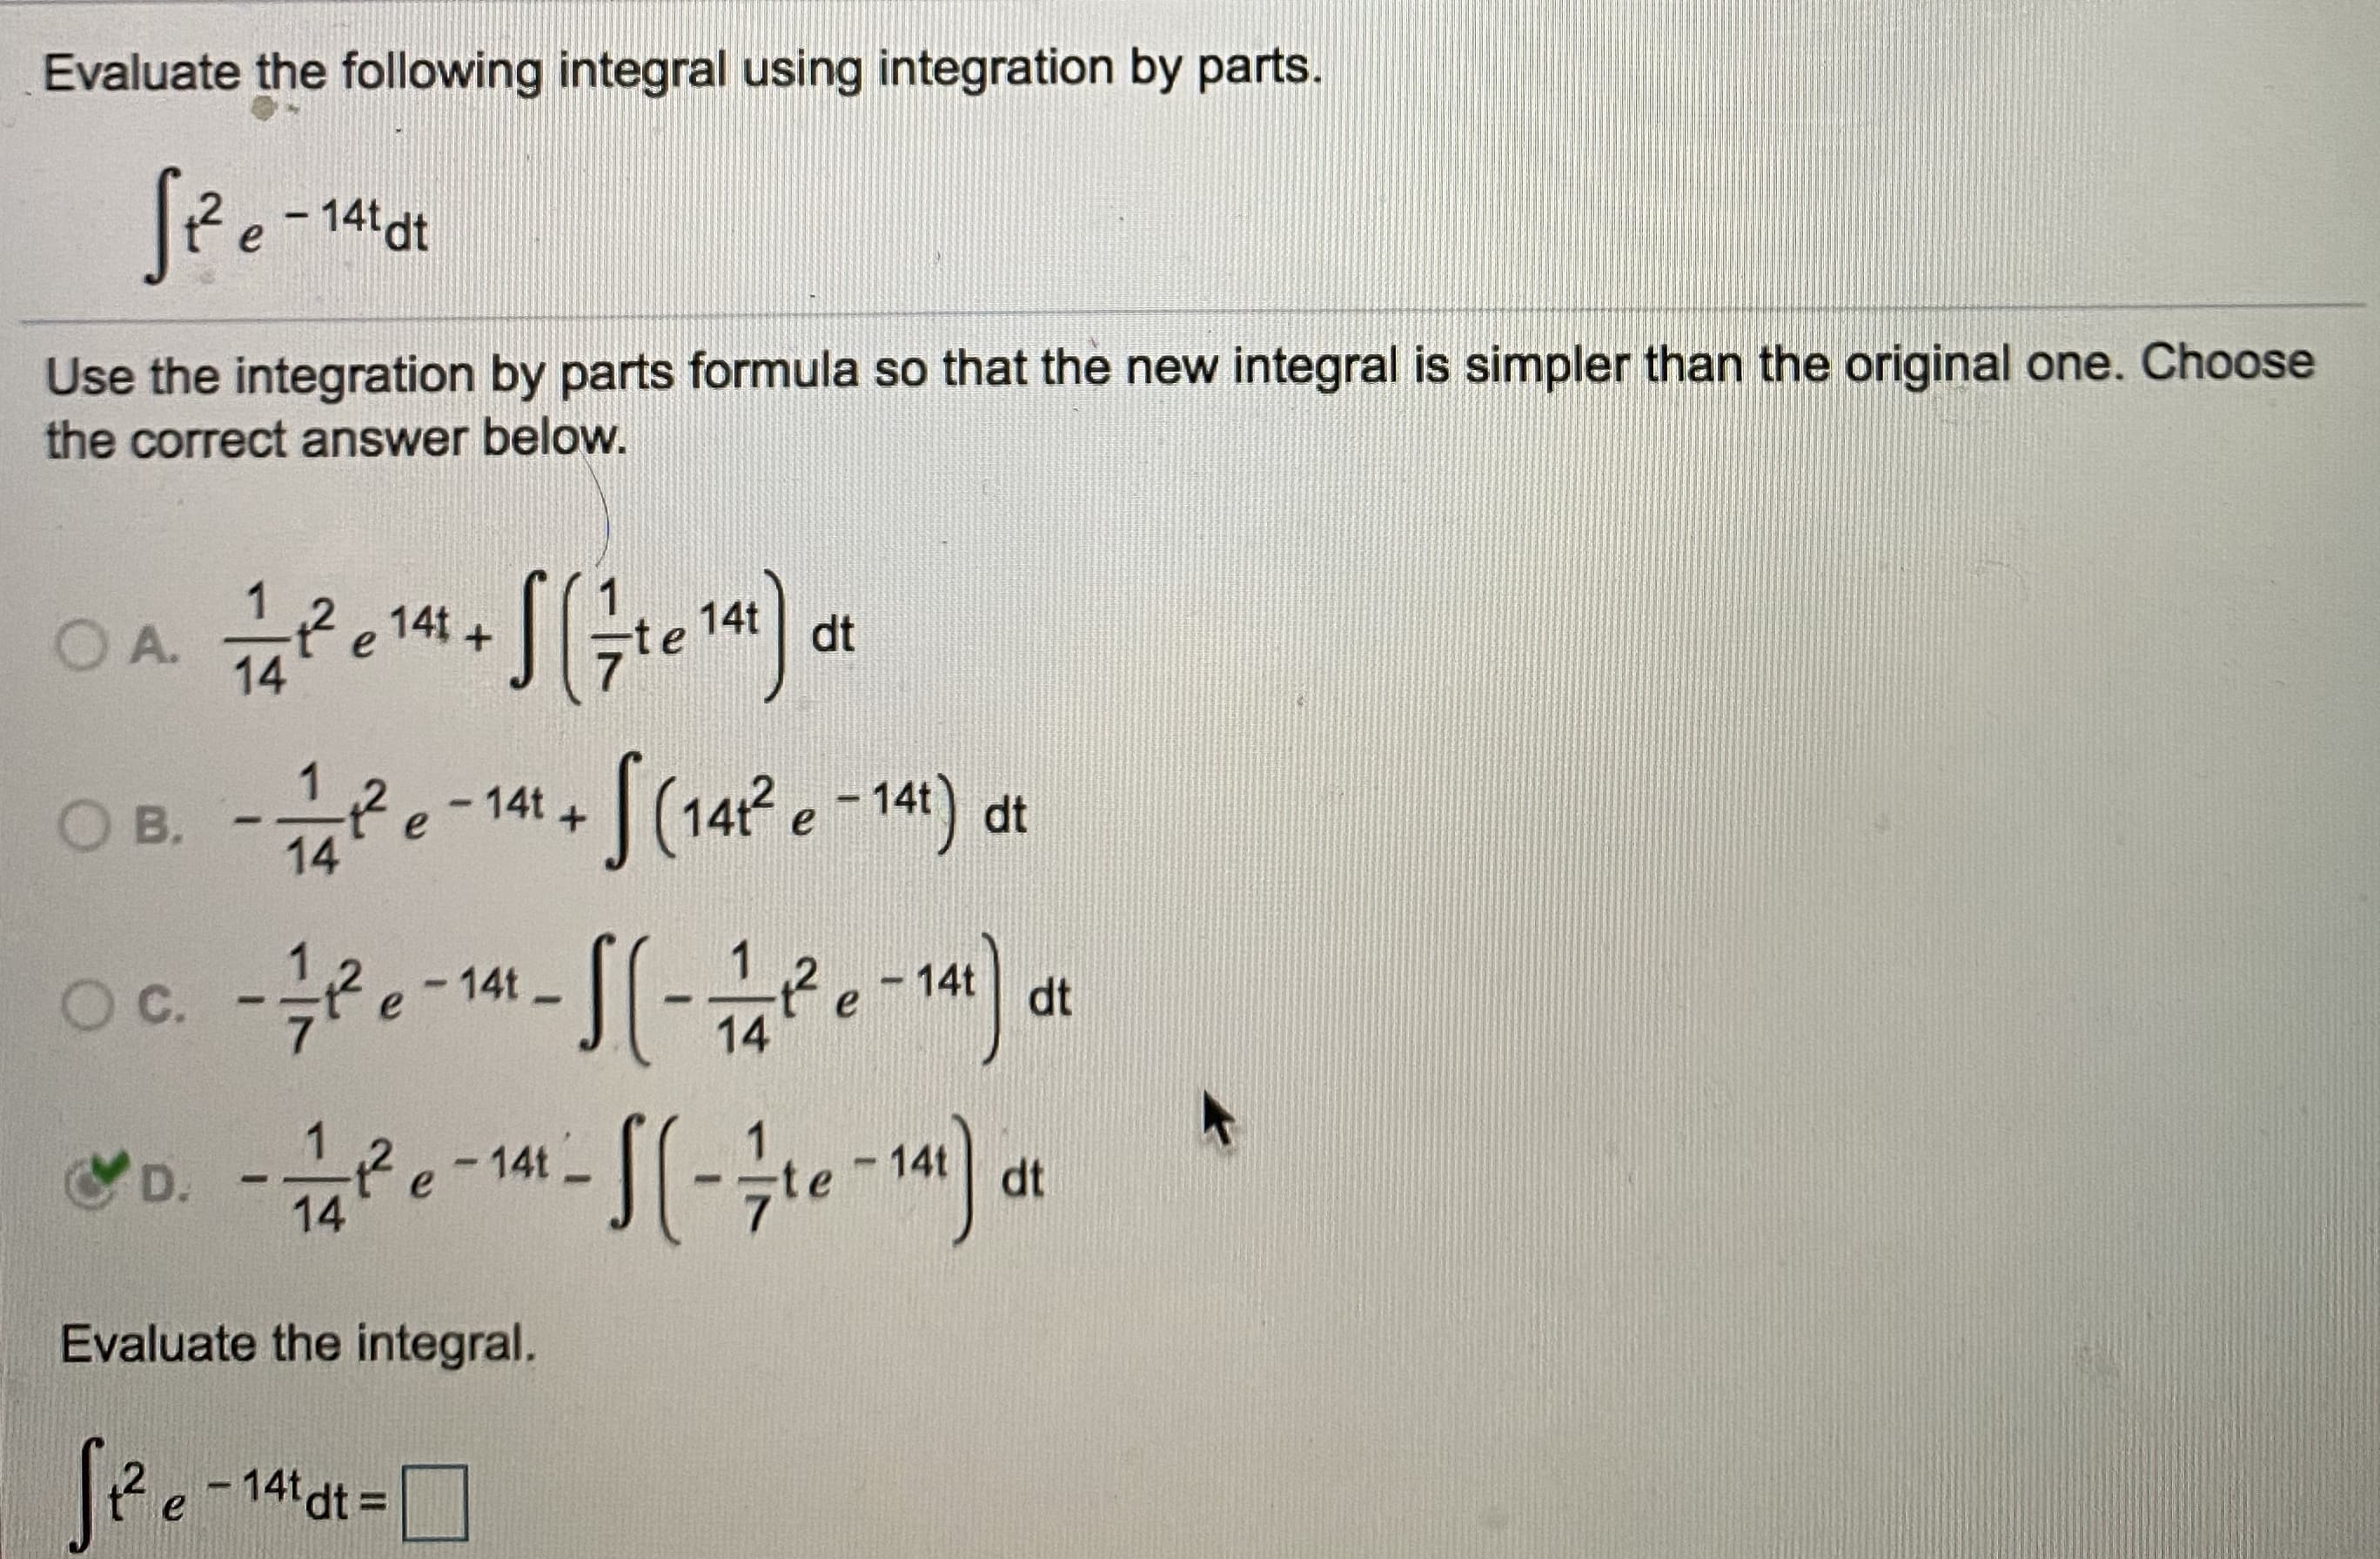 Evaluate the following integral using integration by parts.
- 14t dt
